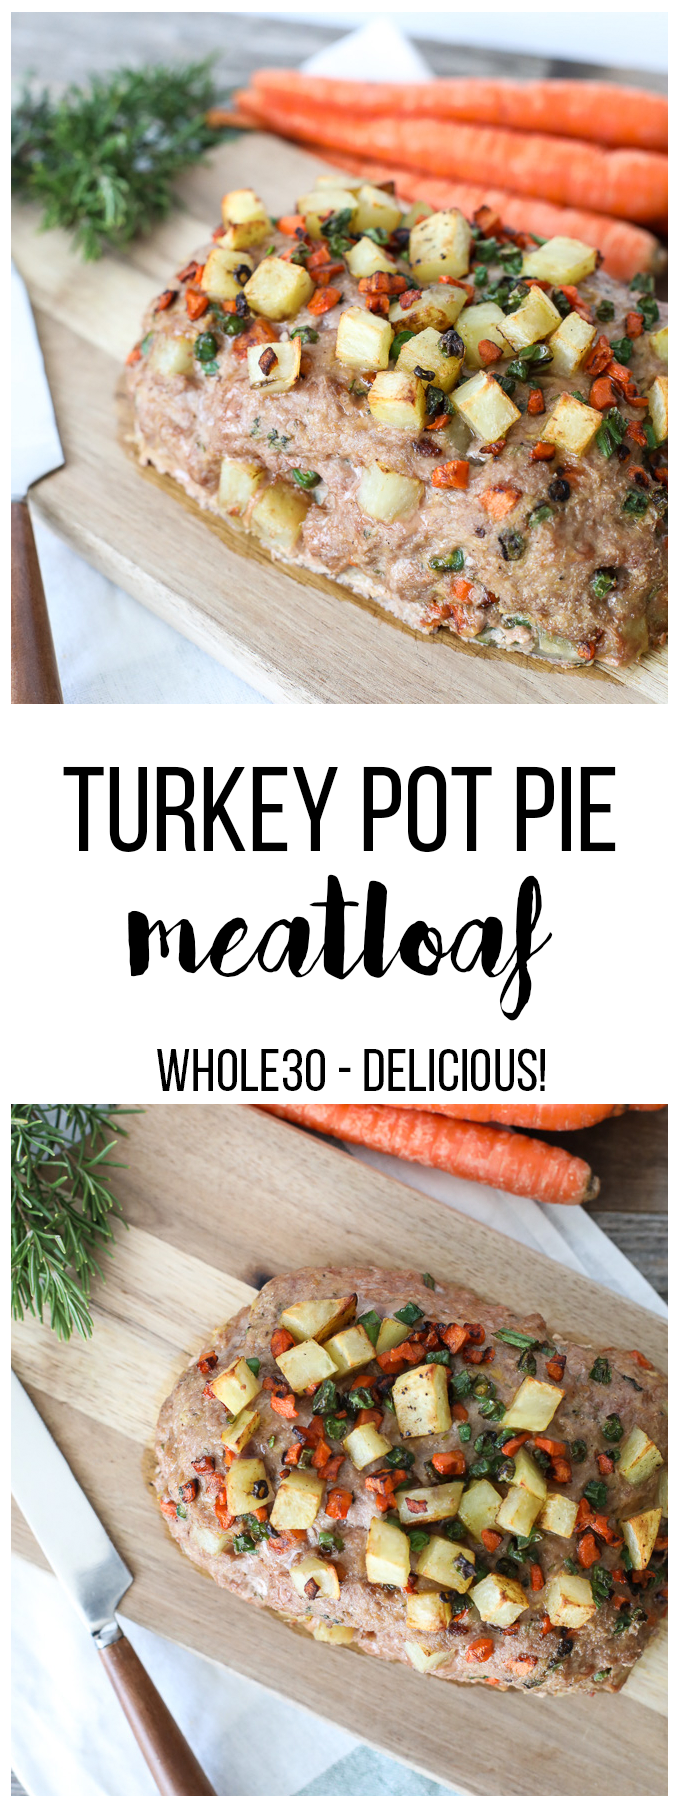 This Turkey Pot Pie Meatloaf is simple, has incredible flavor and is Whole30 compliant!